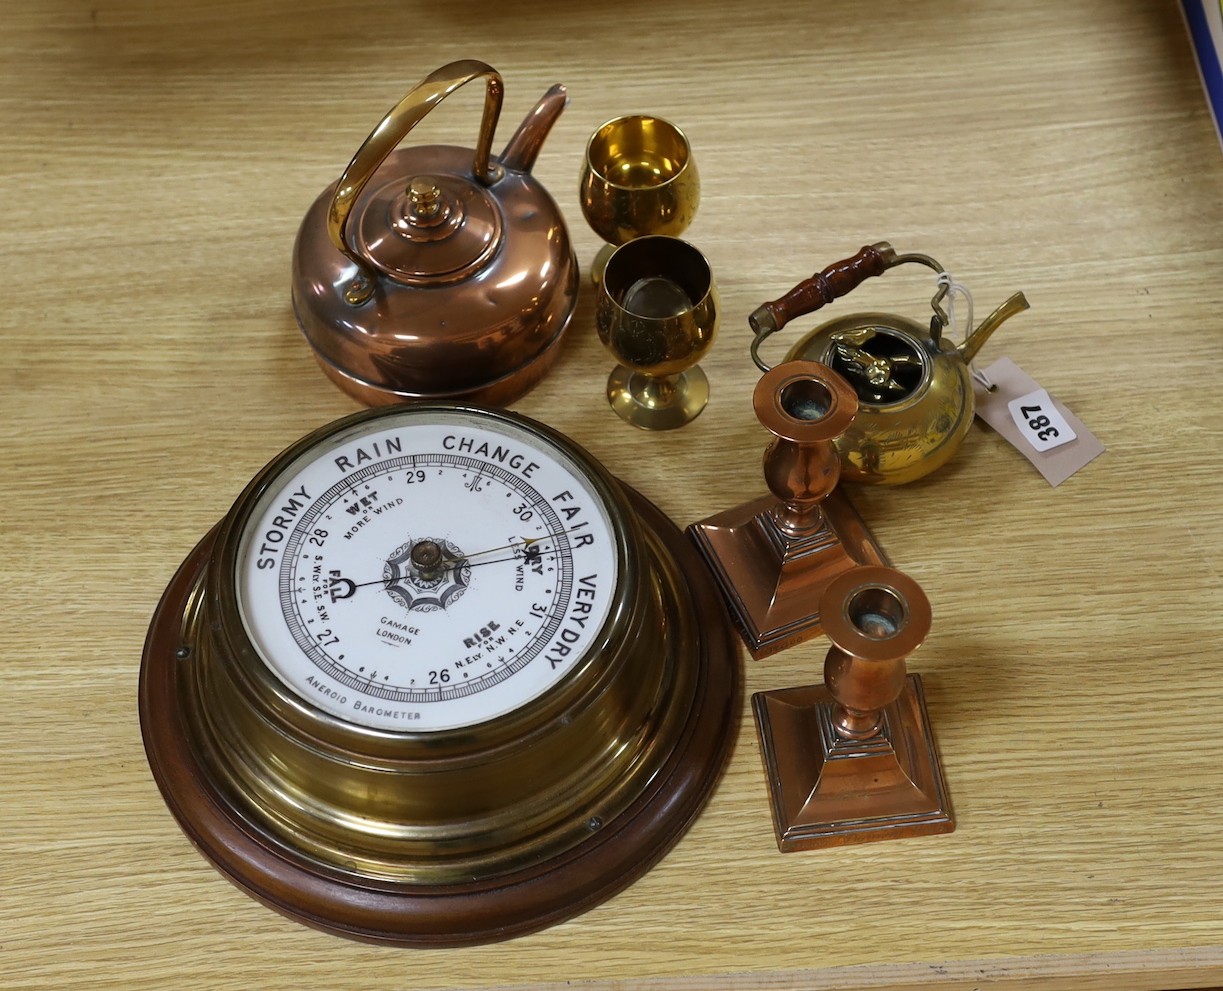 A Gamages aneroid barometer and a group of metalware,barometer 36 cms diameter including wooden